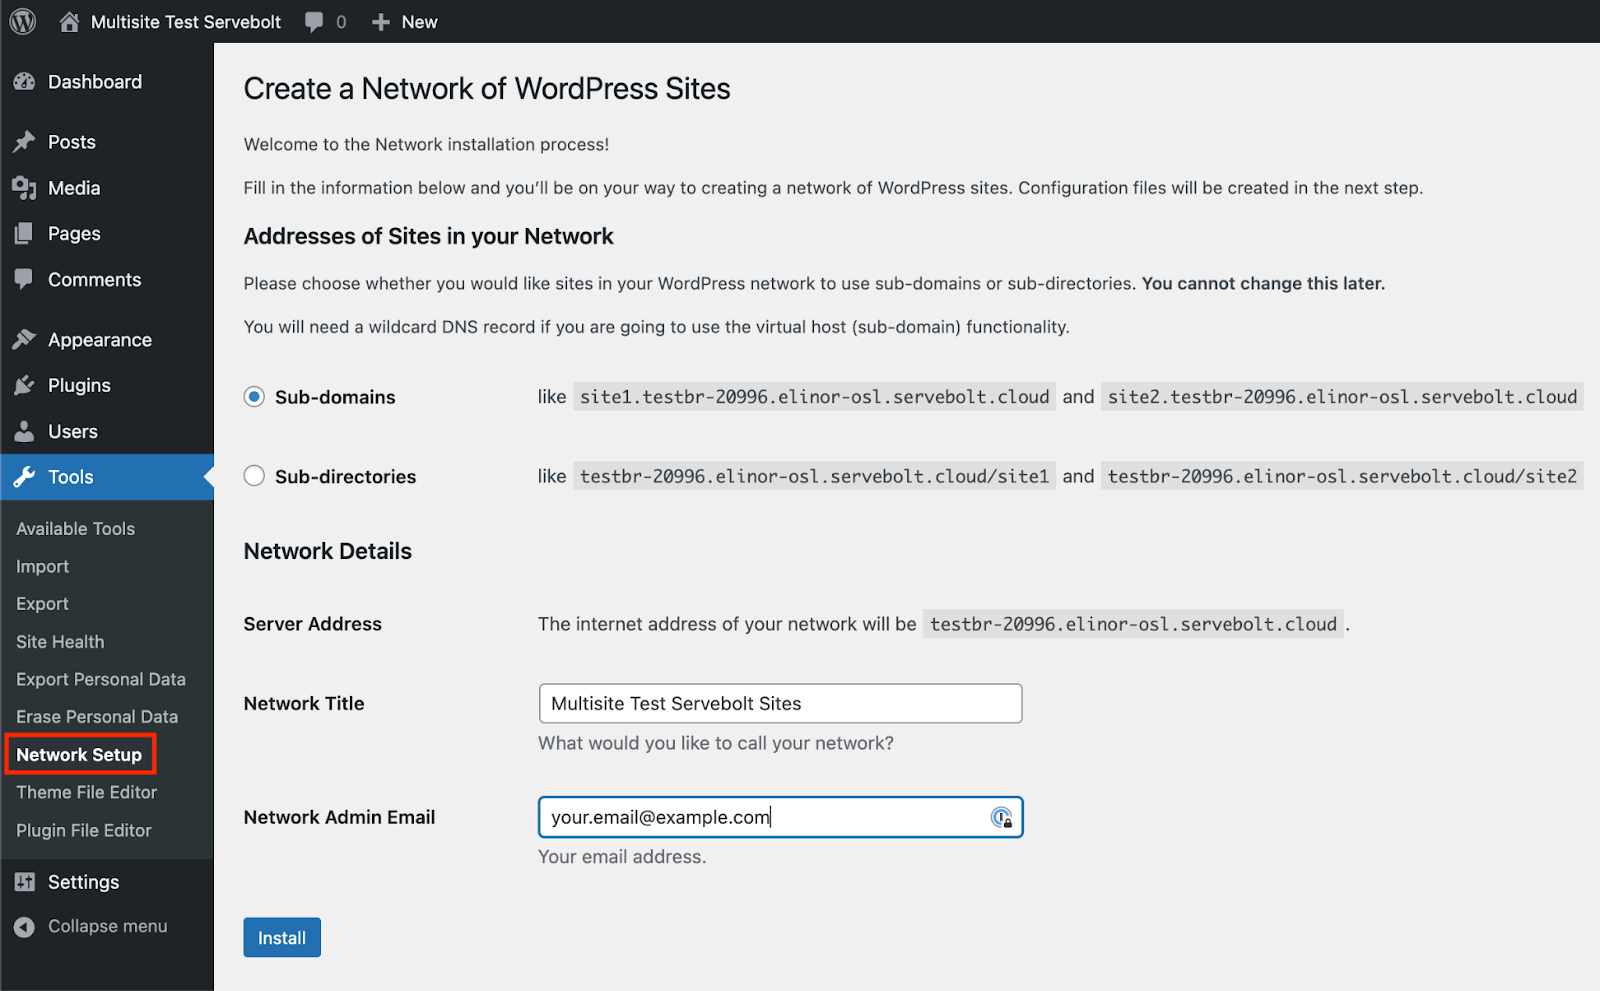 Screenshot of the WordPress Multisite Network Setup page. Ine image you can choose betwen setting up a sub-domans or a sub-directories multisite.